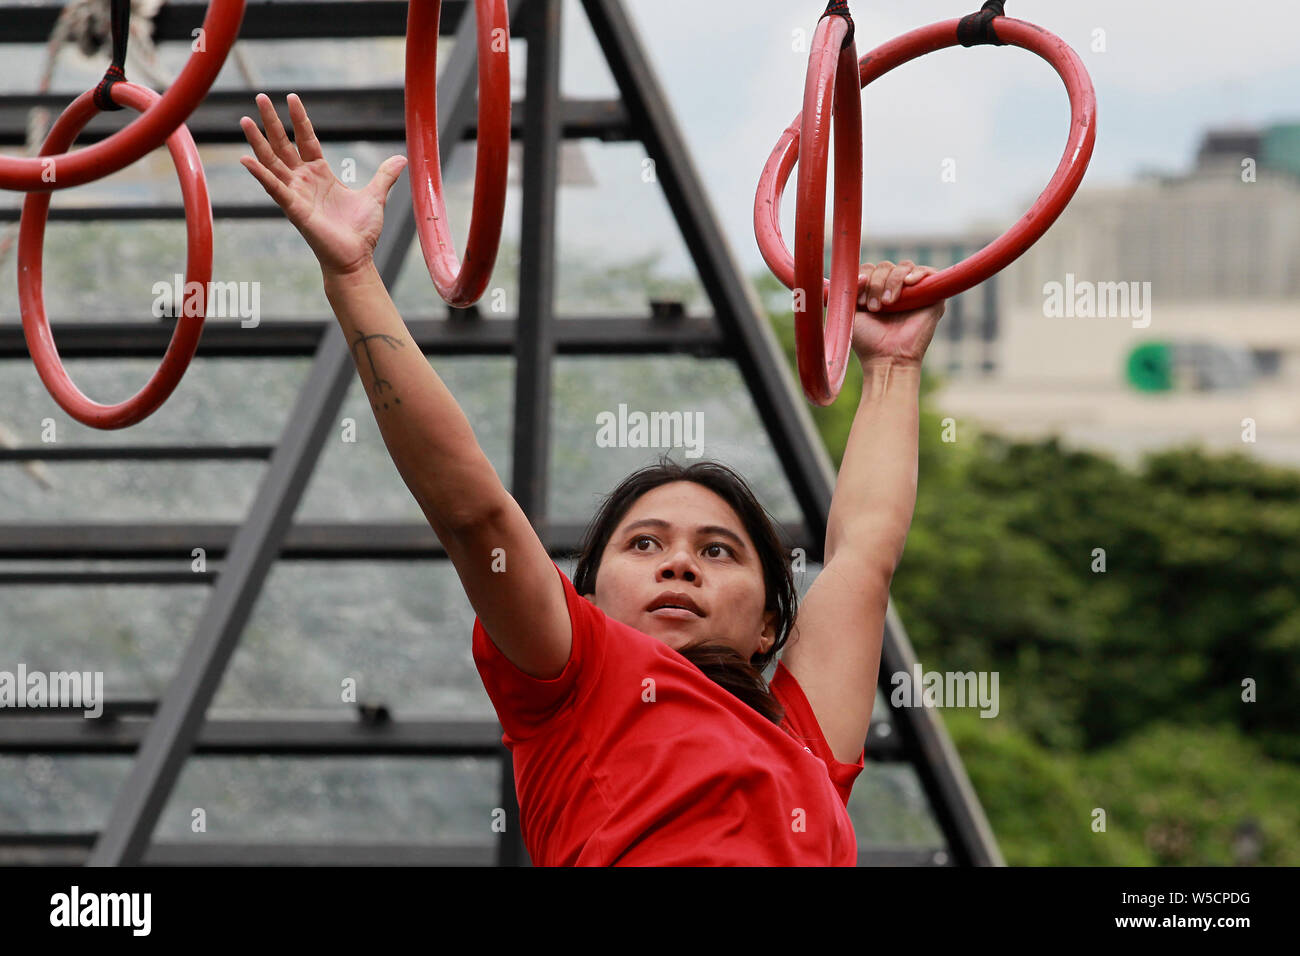 Manila, Philippines. 28th July, 2019. A contestant participates in the 2019 Asia Obstacle Course Race (OCR) Games in Manila, the Philippines, July 28, 2019. Credit: Rouelle Umali/Xinhua/Alamy Live News Stock Photo